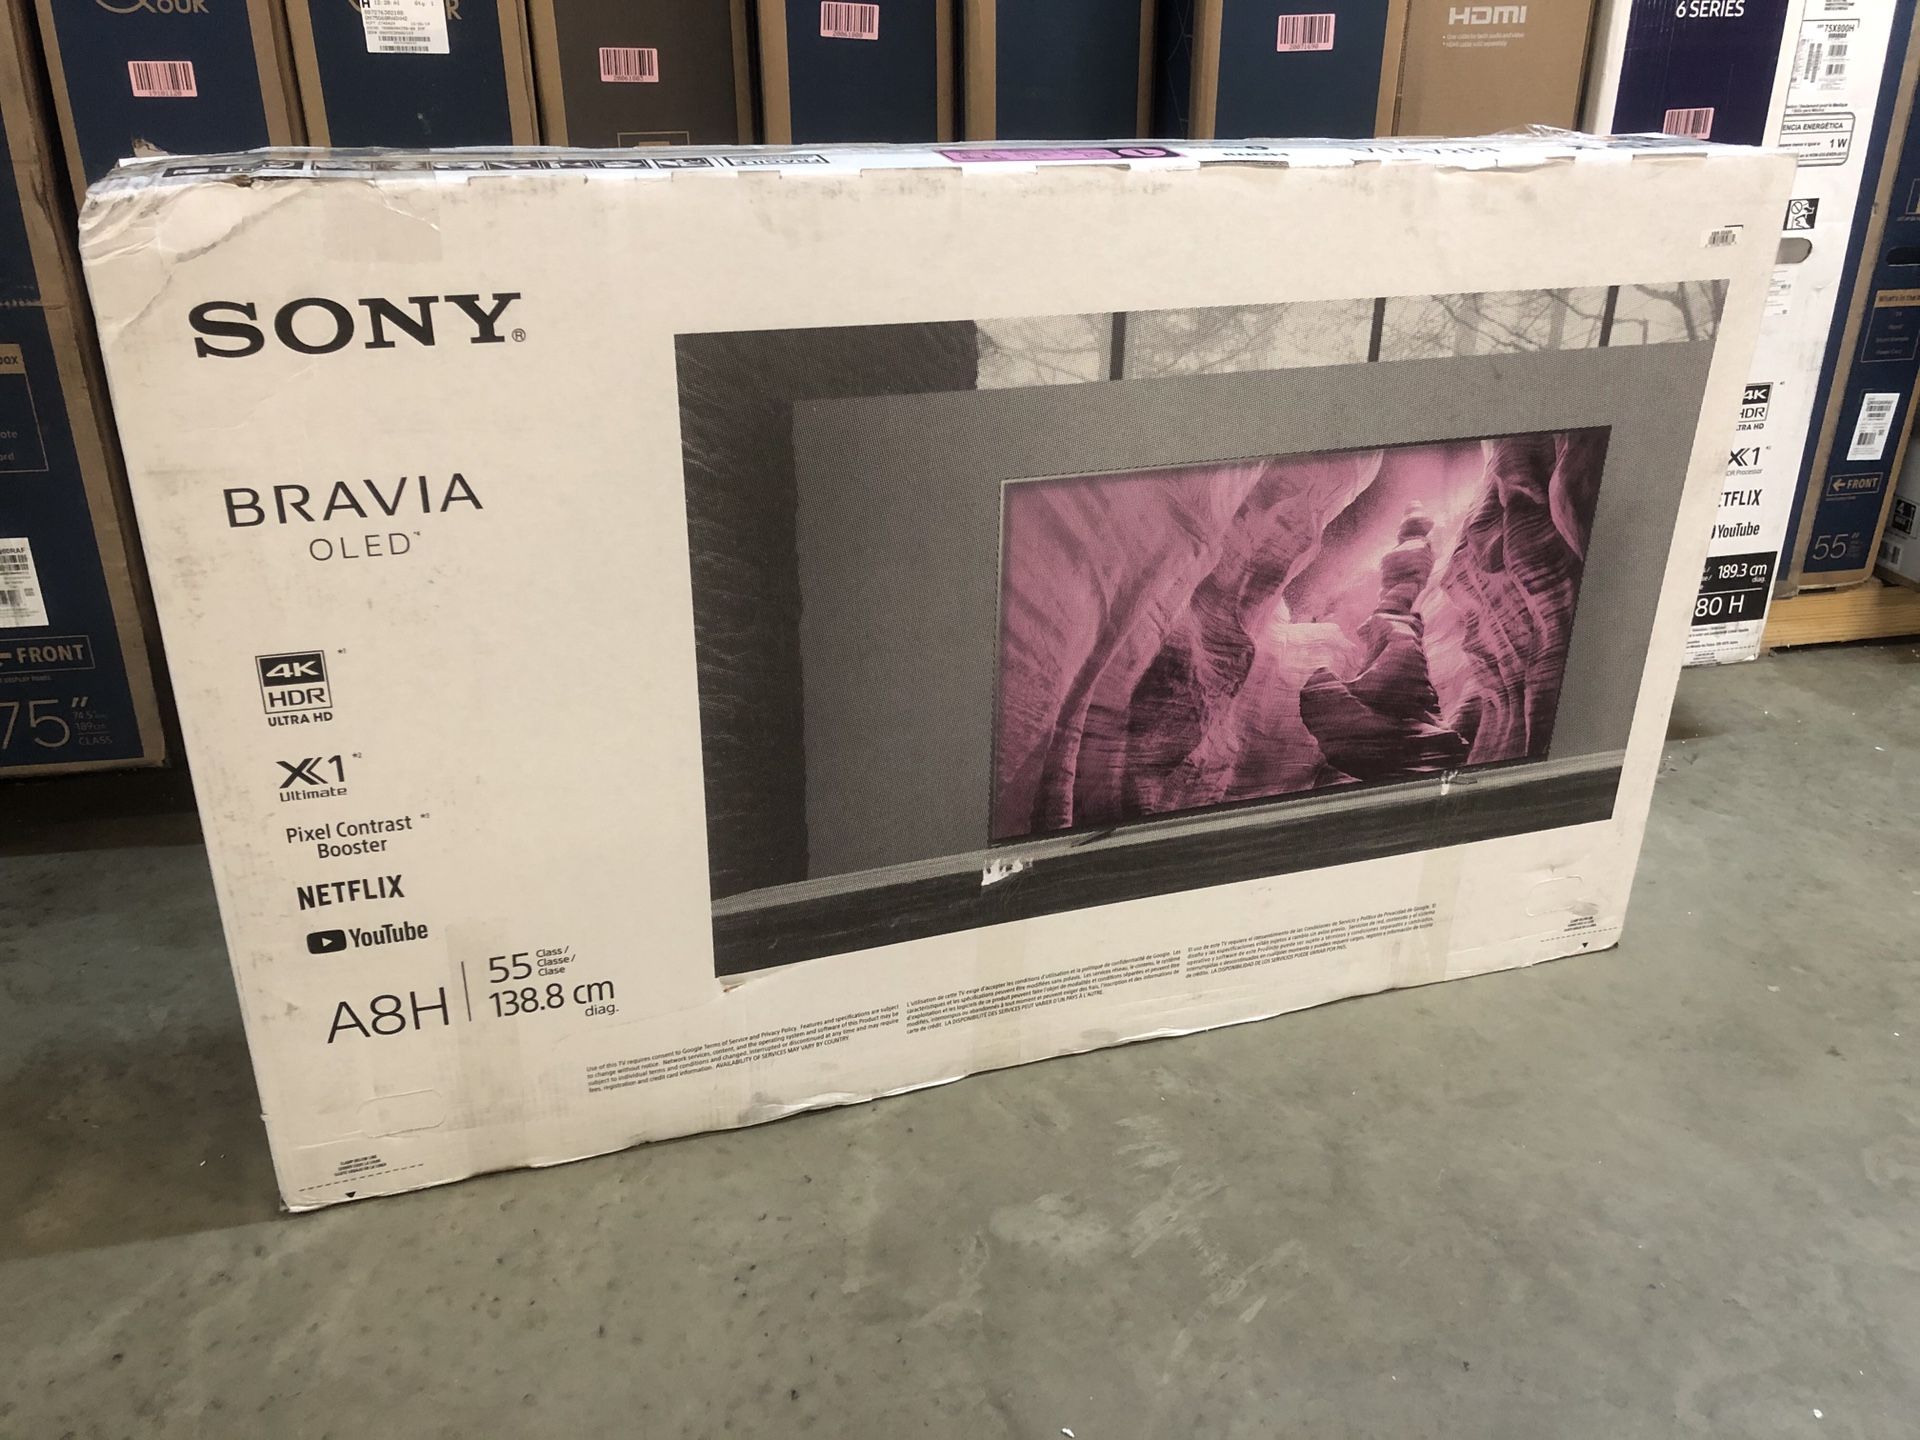 Sony 55-inch A8H OLED 4K UHD Smart Android TV XBR55A8H